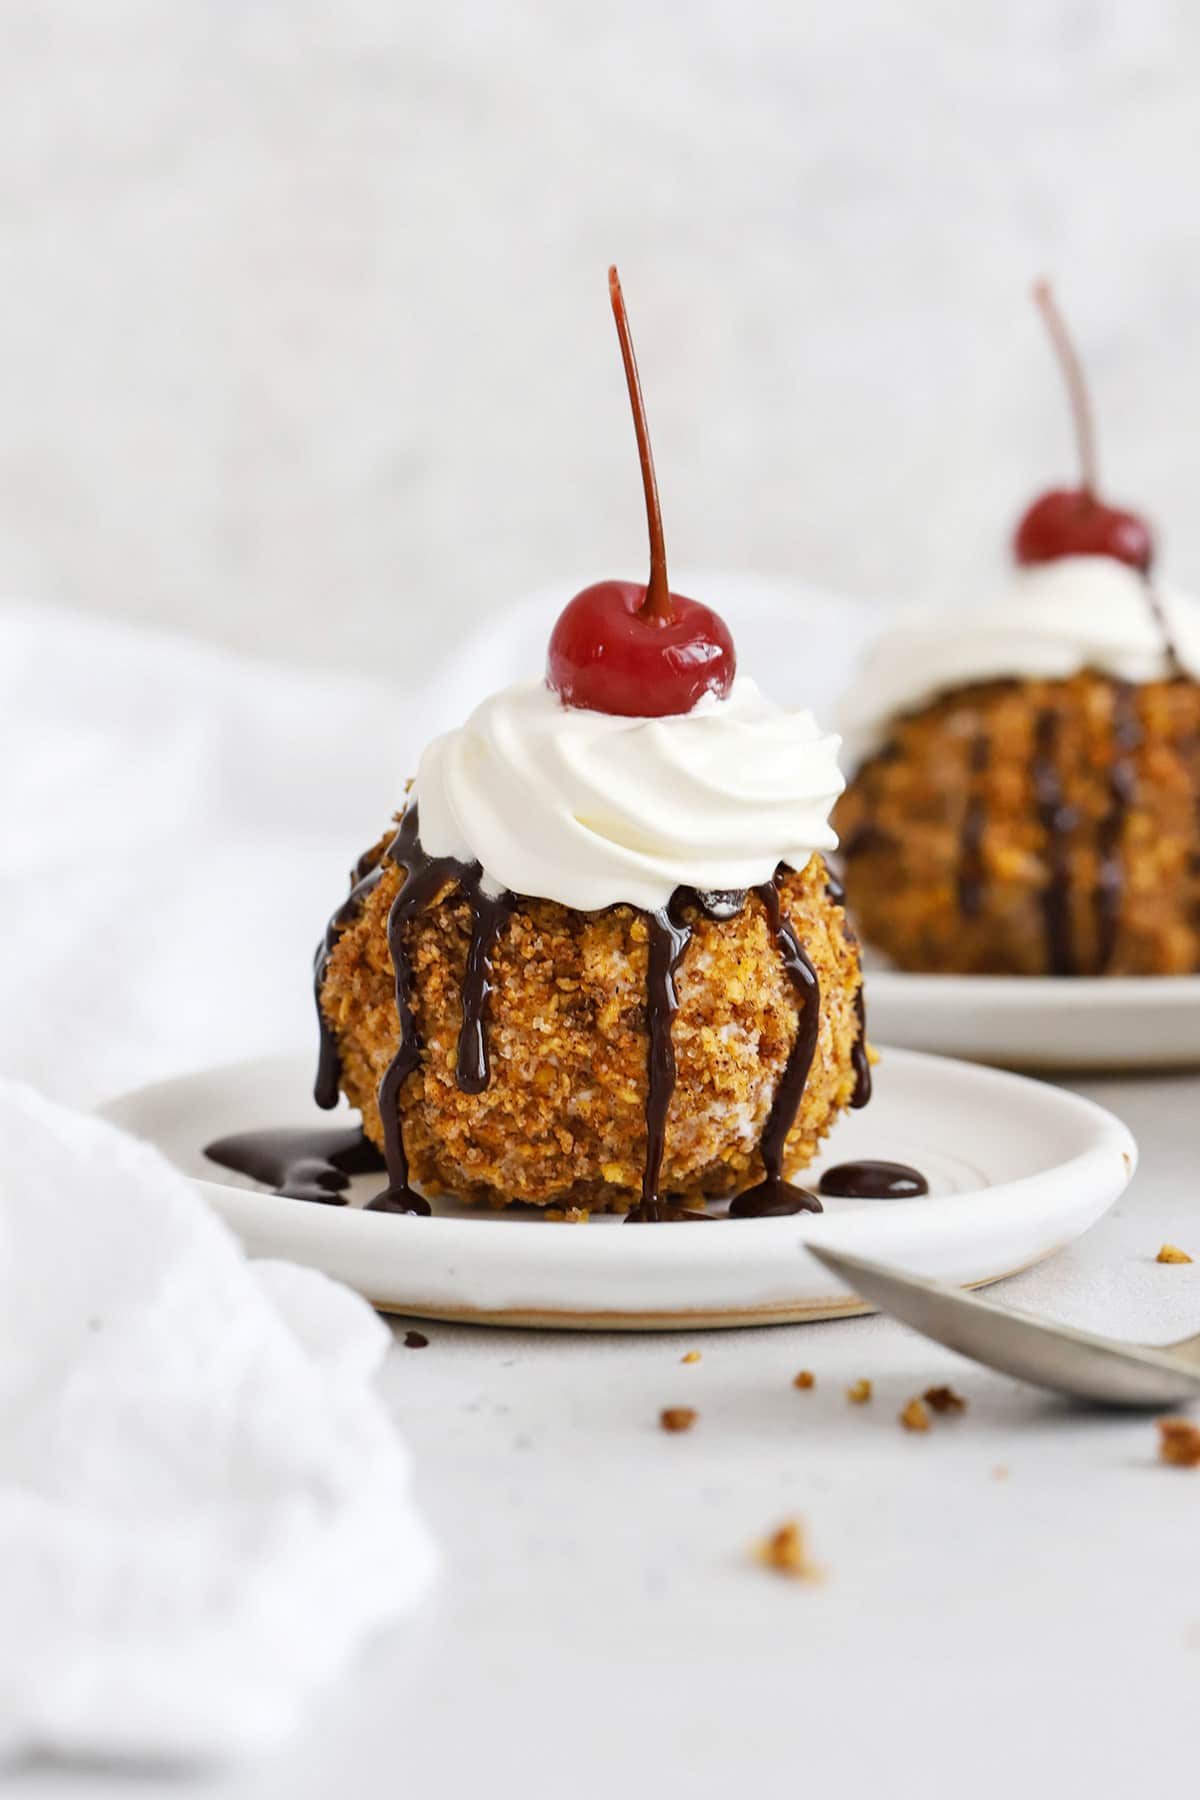 Front view of gluten-free fried ice cream topped with whipped cream, chocolate syrup, and a maraschino cherry